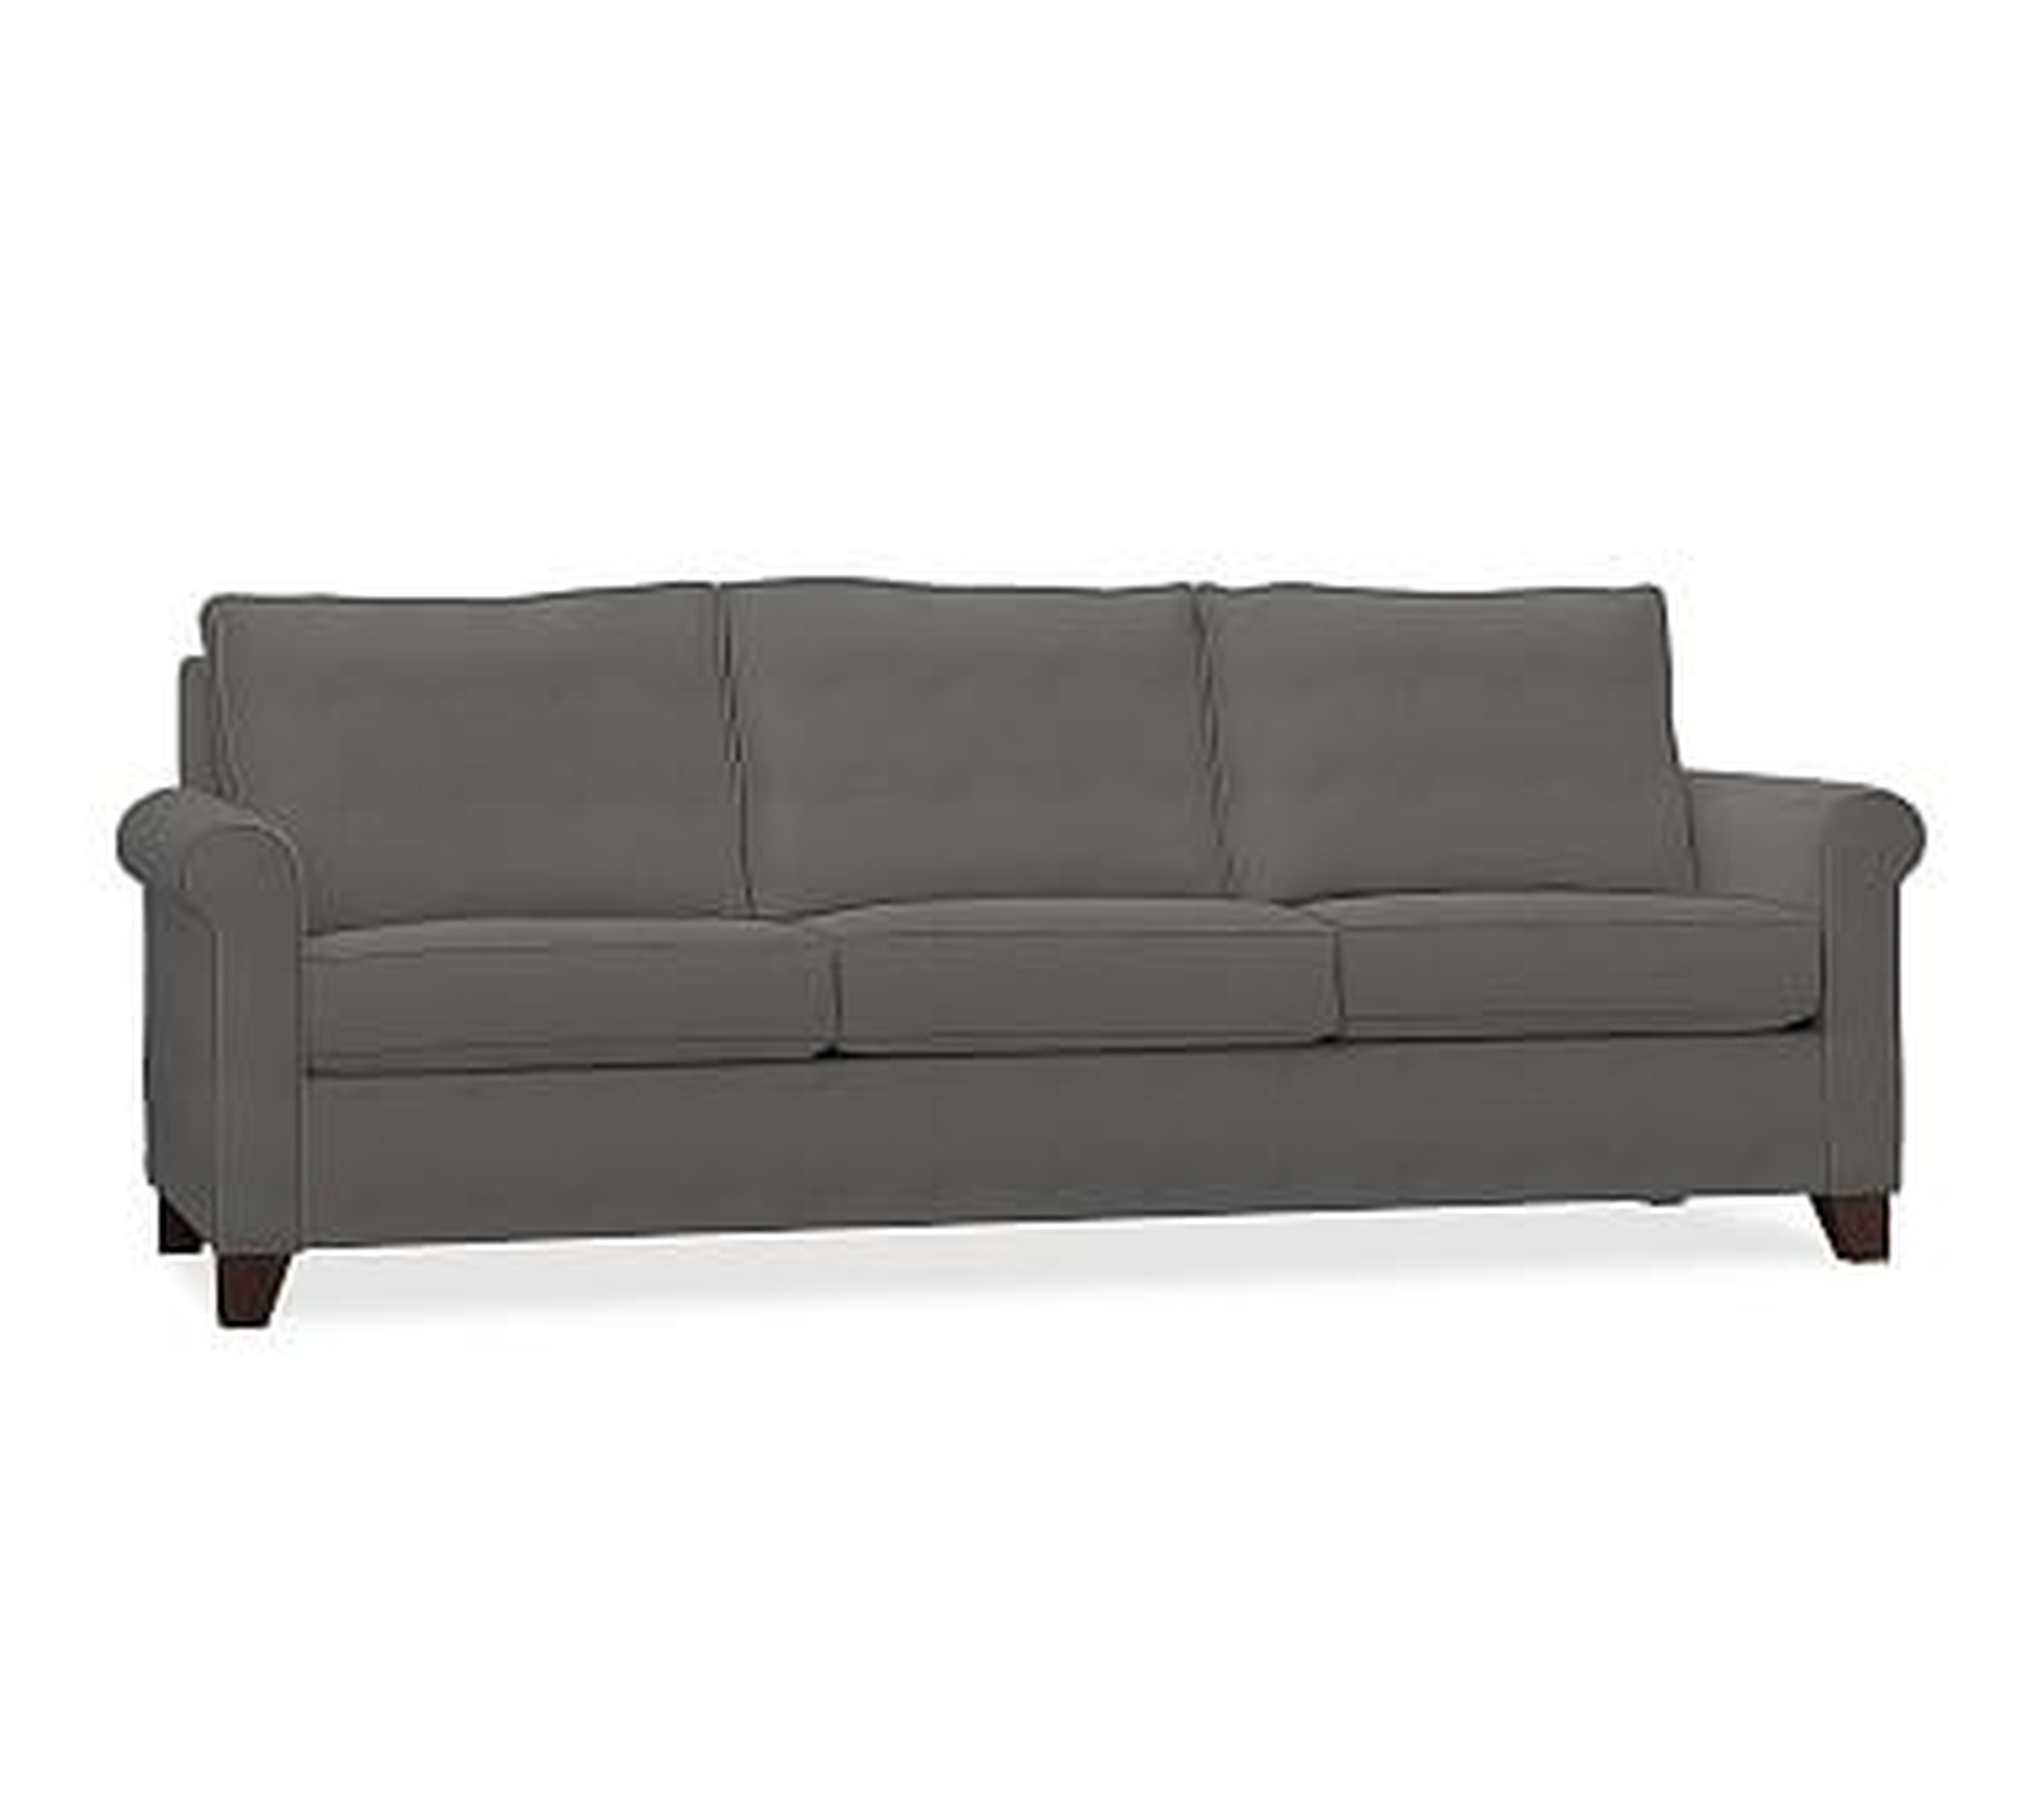 Cameron Roll Arm Upholstered Grand Sofa 98", Polyester Wrapped Cushions, Basketweave Slub Charcoal - Pottery Barn